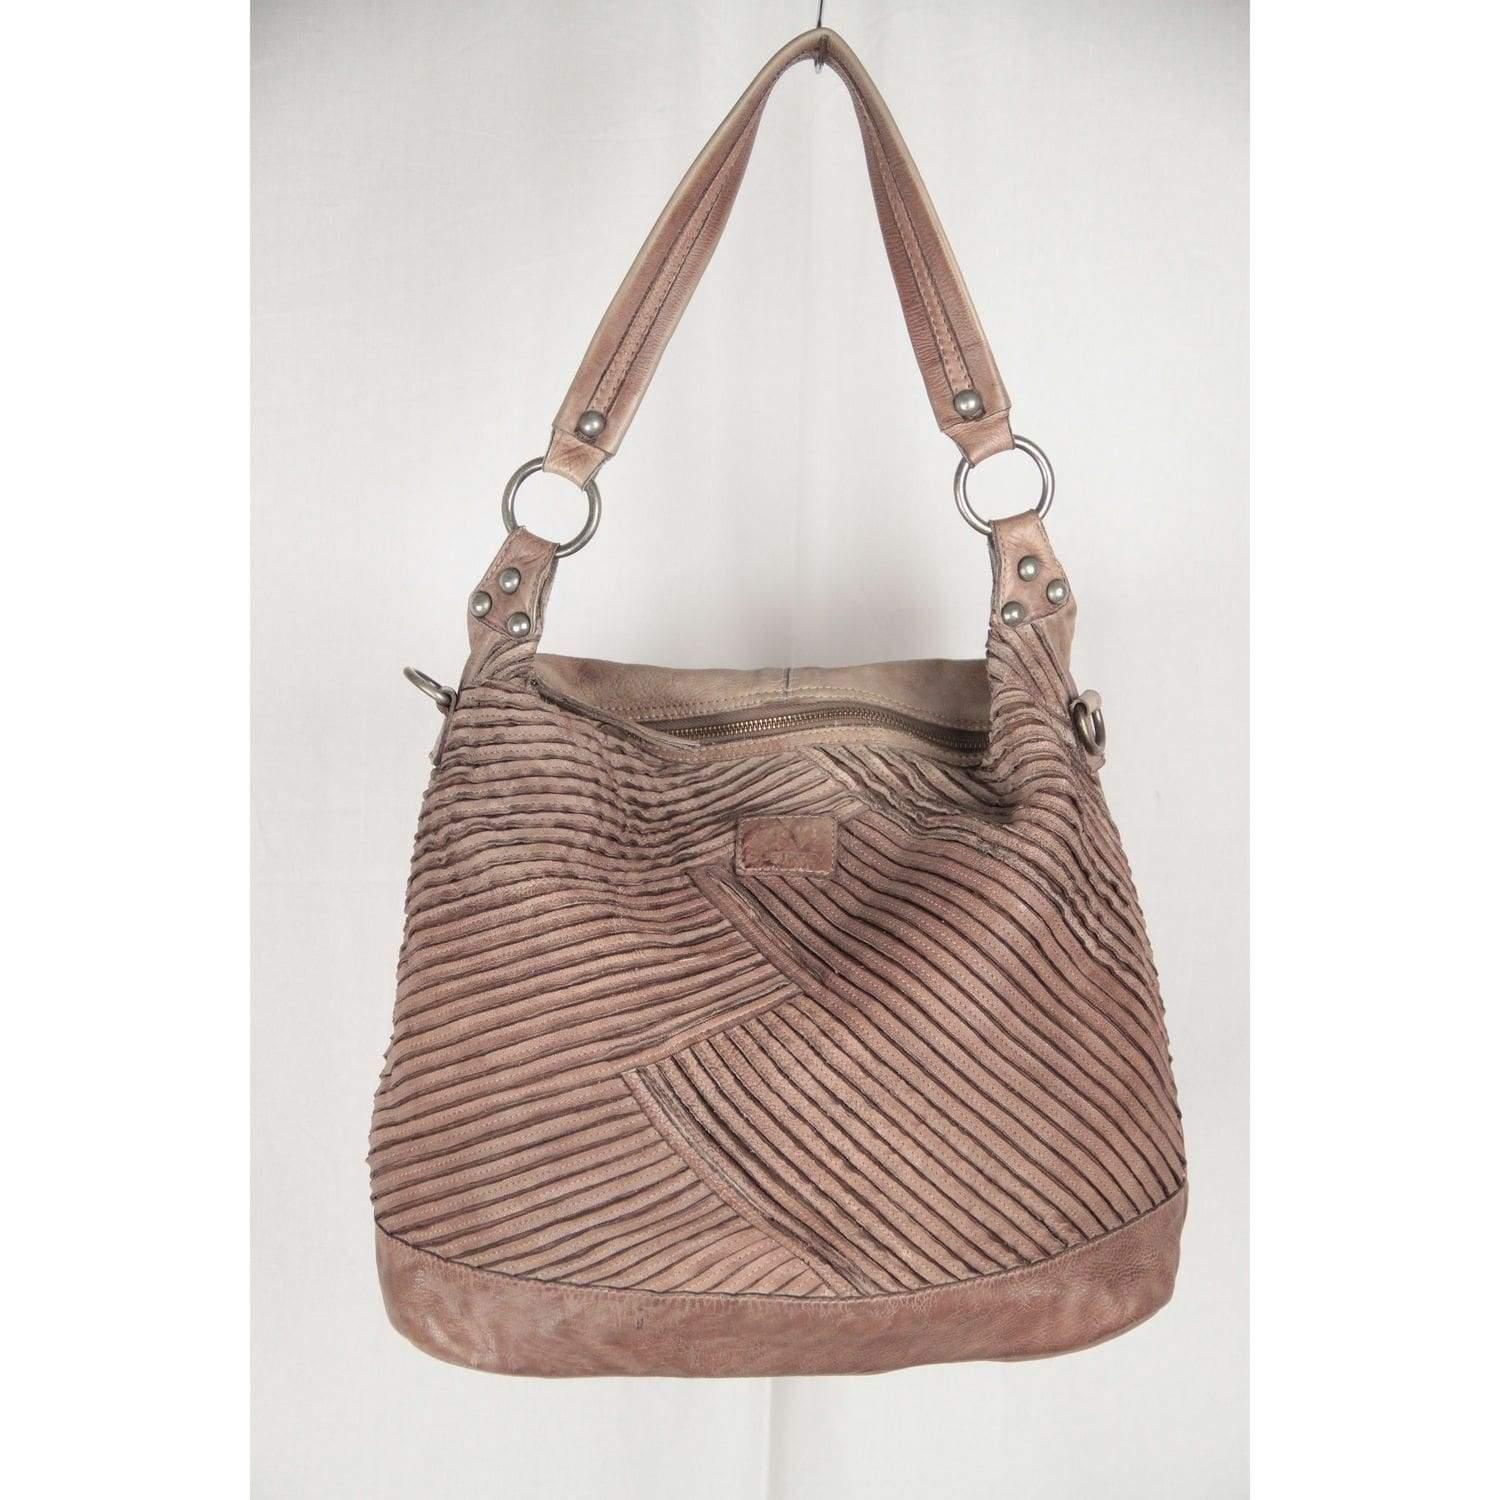 Brown SURI FREY Taupe Pintucked Leather MILEY TOTE Shoulder Bag